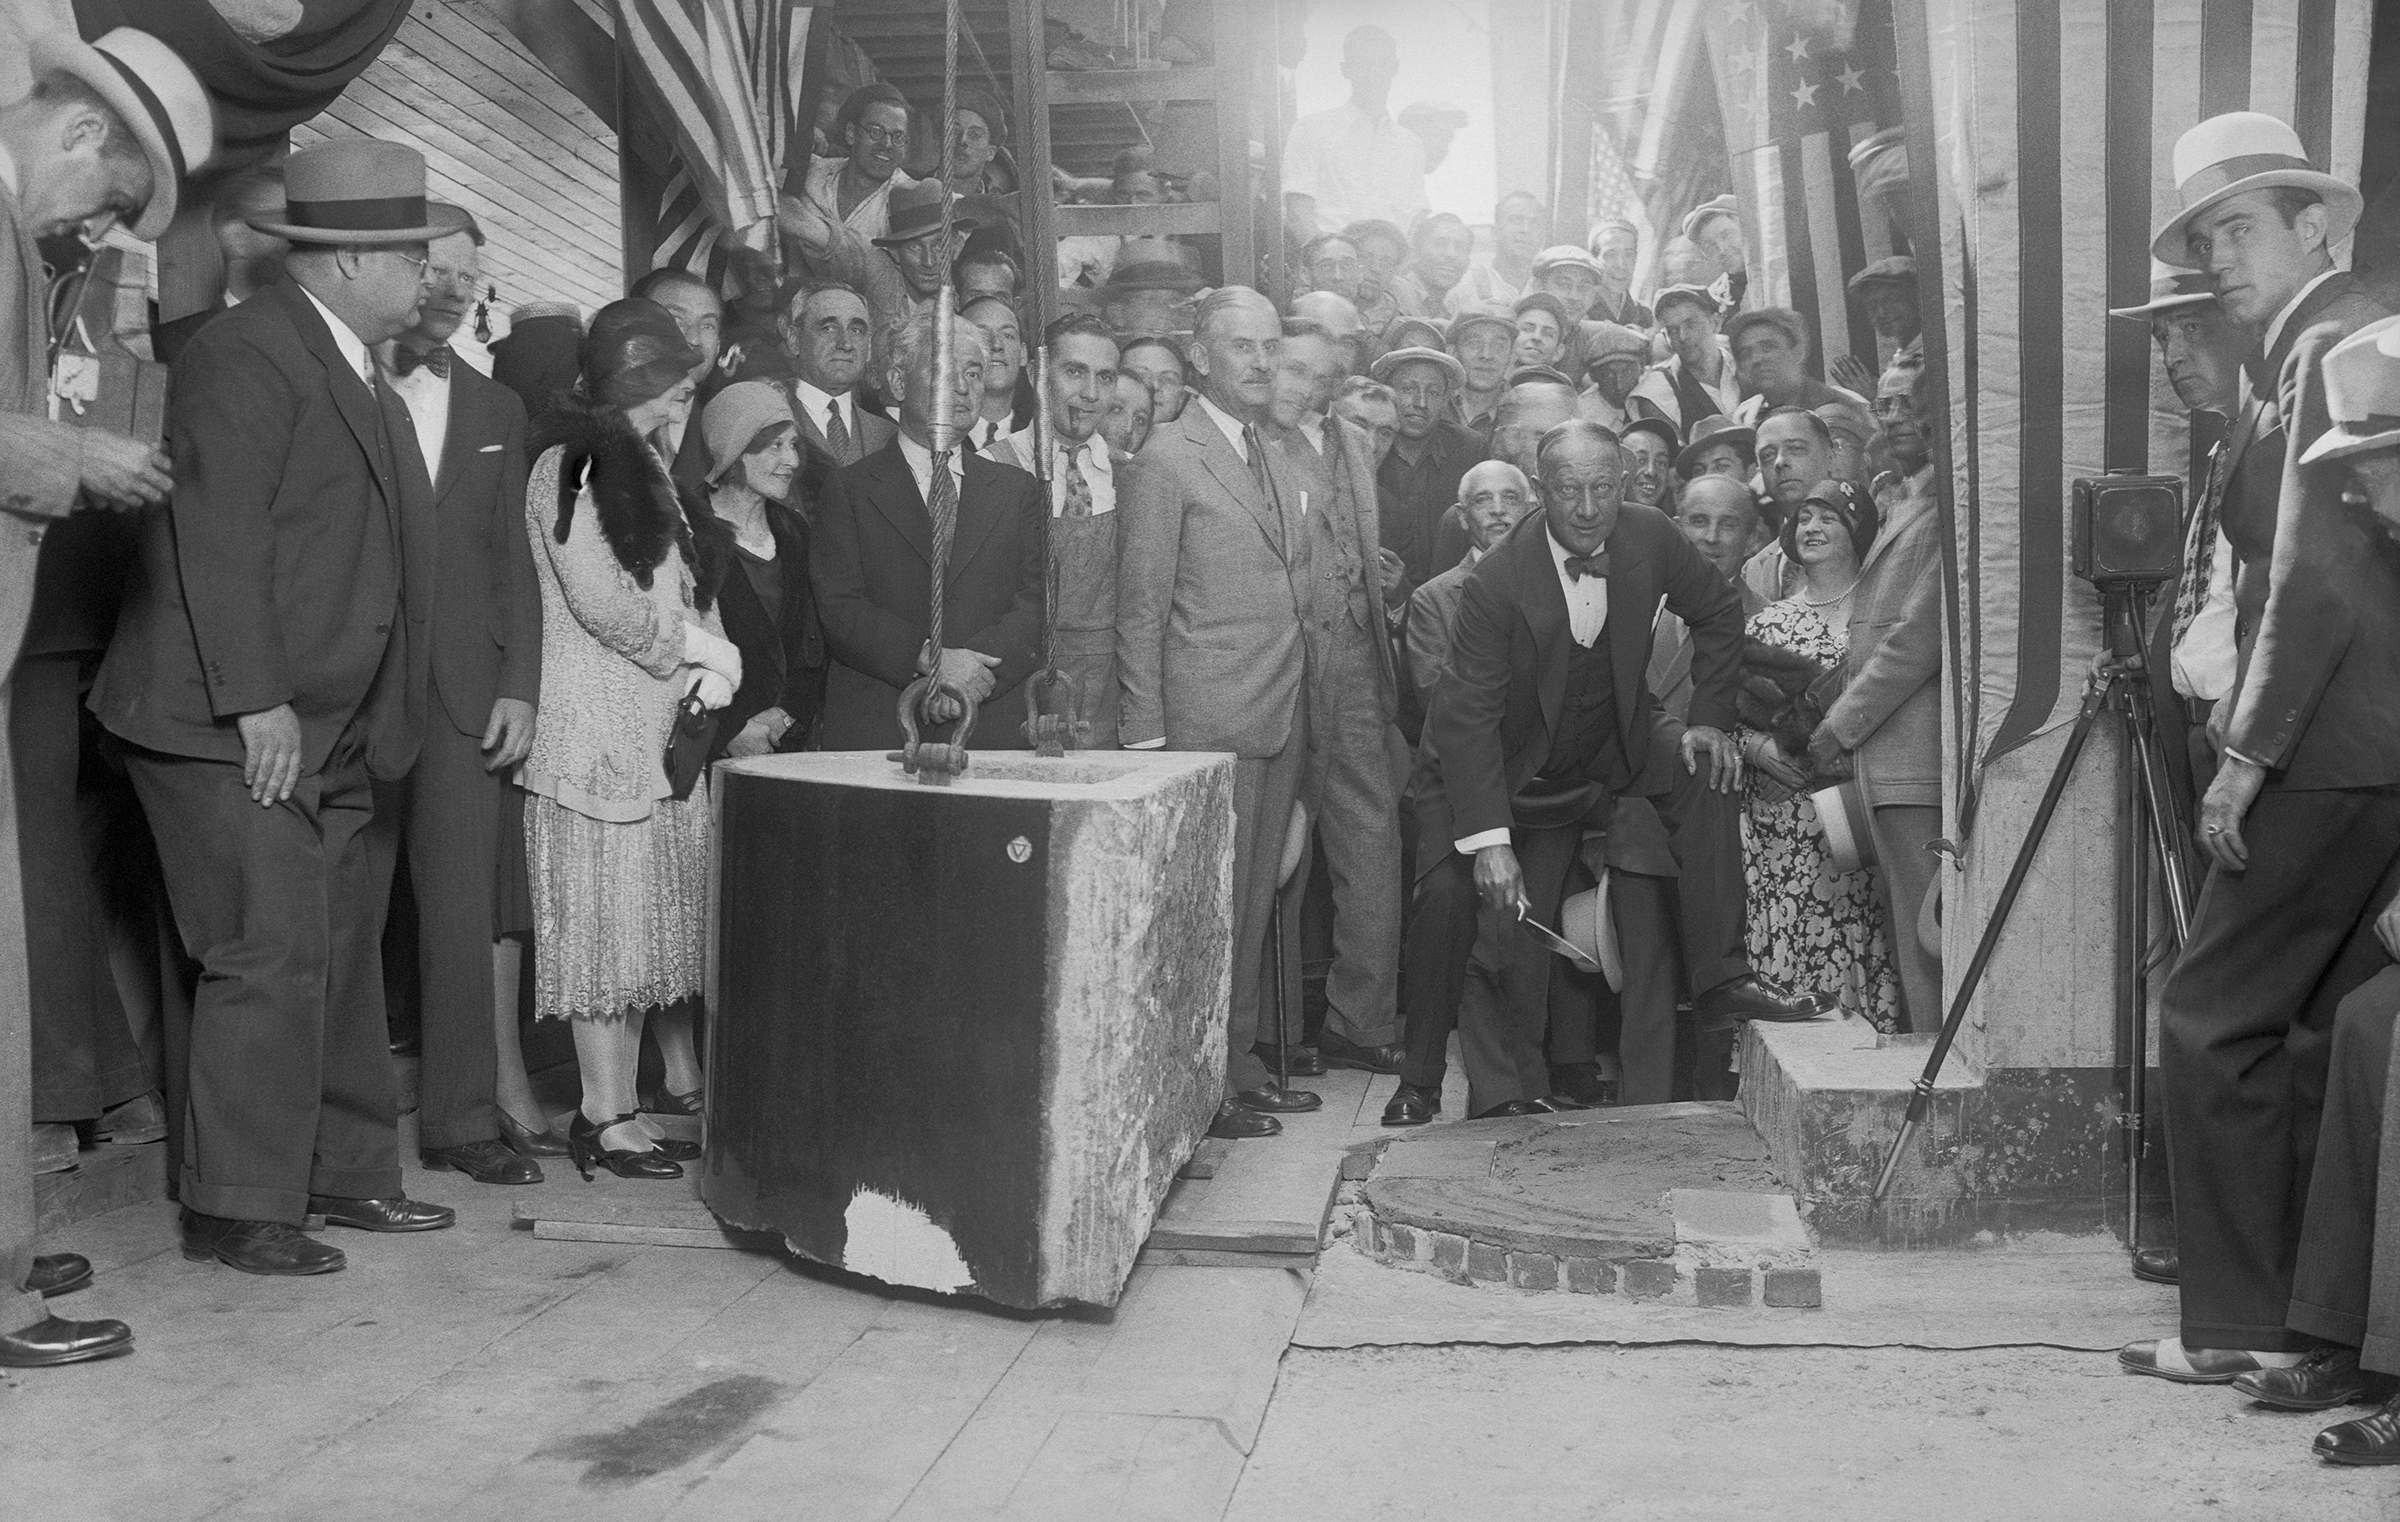 As possessor of a gold membership card in the bricklayers' union, former Governor Alfred E. Smith performed a thorough job when he laid cornerstone for the Empire State Building on Fifth avenue and 34th street, New York City, before a crowd of onlookers on Sept. 9, 1930.As possessor of a gold membership card in the bricklayers' union, Alfred Smith performed a thorough job when he laid cornerstone for the Empire State Building on Fifth avenue and 34th street, New York City, before a crowd of onlookers on Sept. 9, 1930.